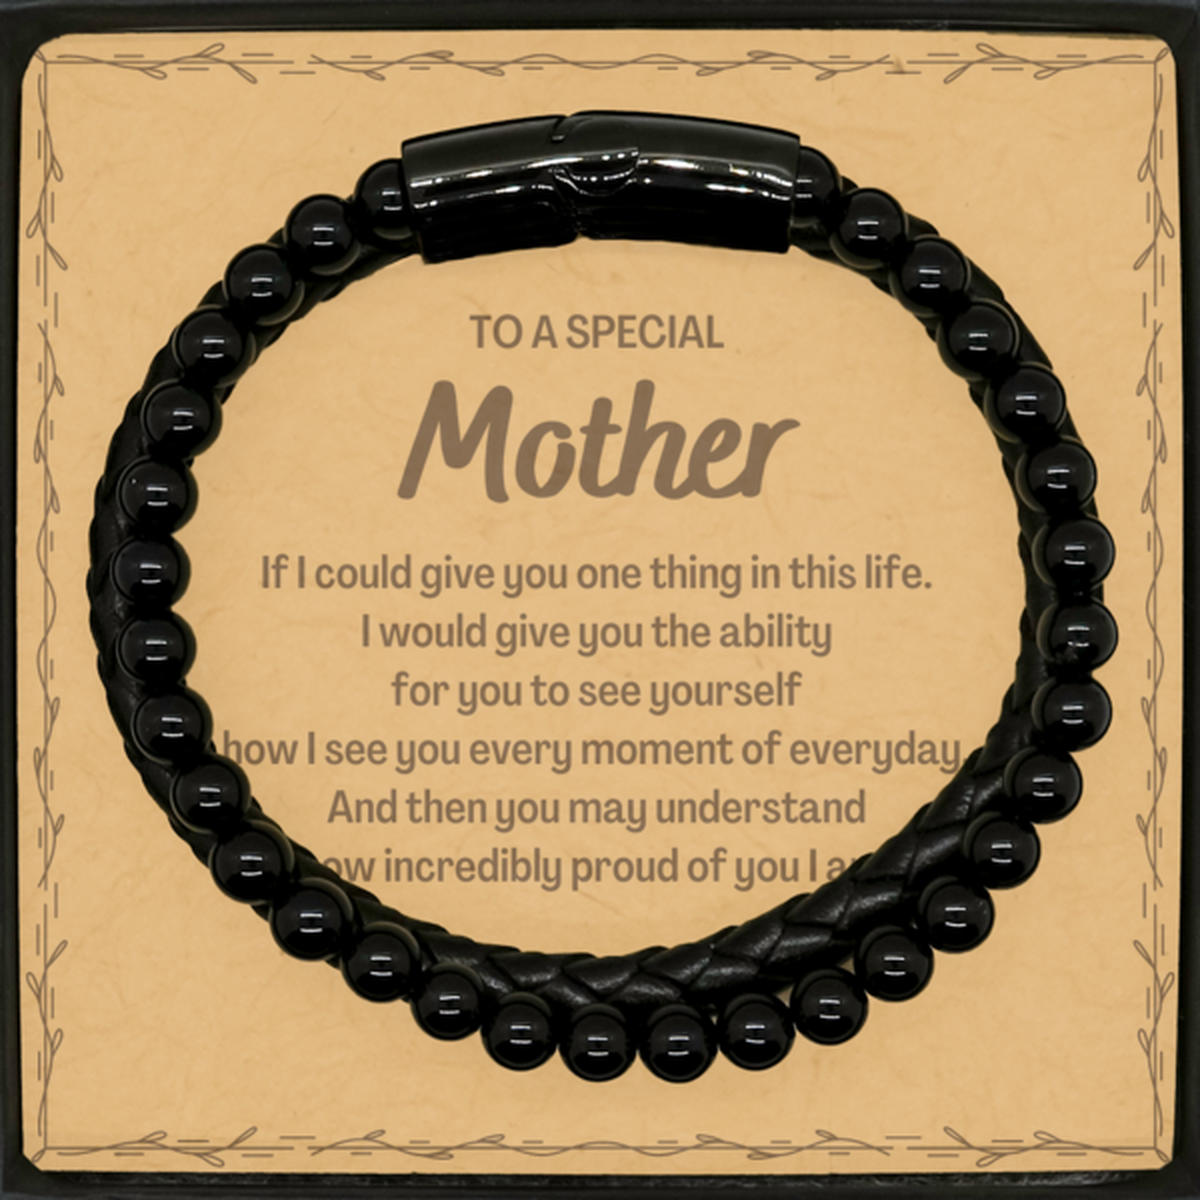 To My Mother Stone Leather Bracelets, Gifts For Mother Message Card, Inspirational Gifts for Christmas Birthday, Epic Gifts for Mother To A Special Mother how incredibly proud of you I am